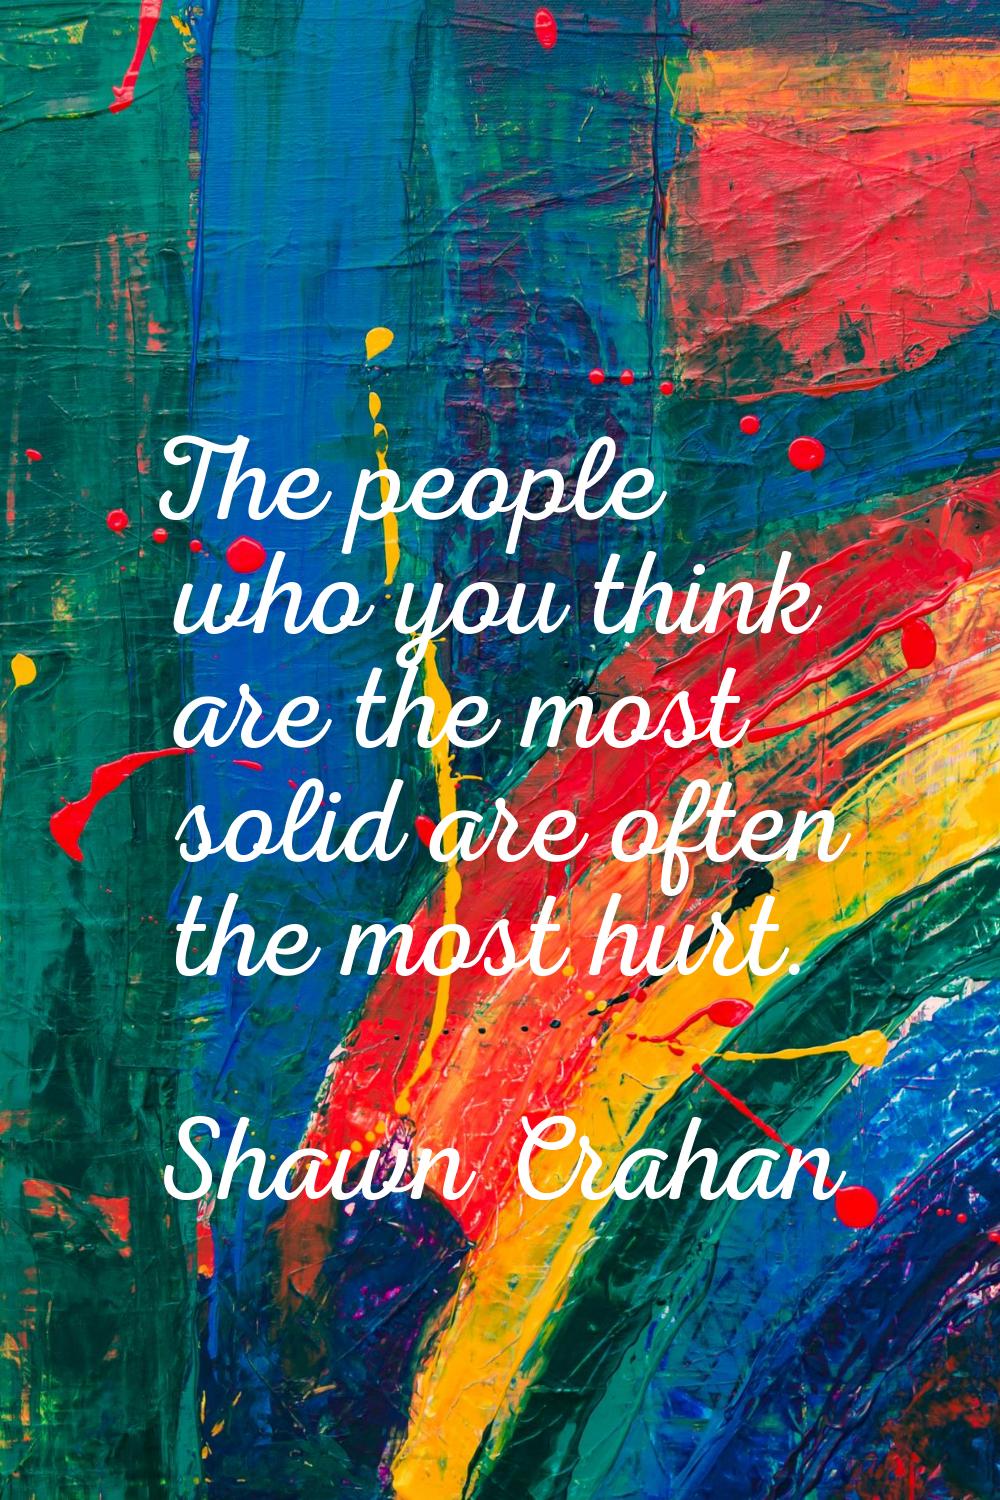 The people who you think are the most solid are often the most hurt.